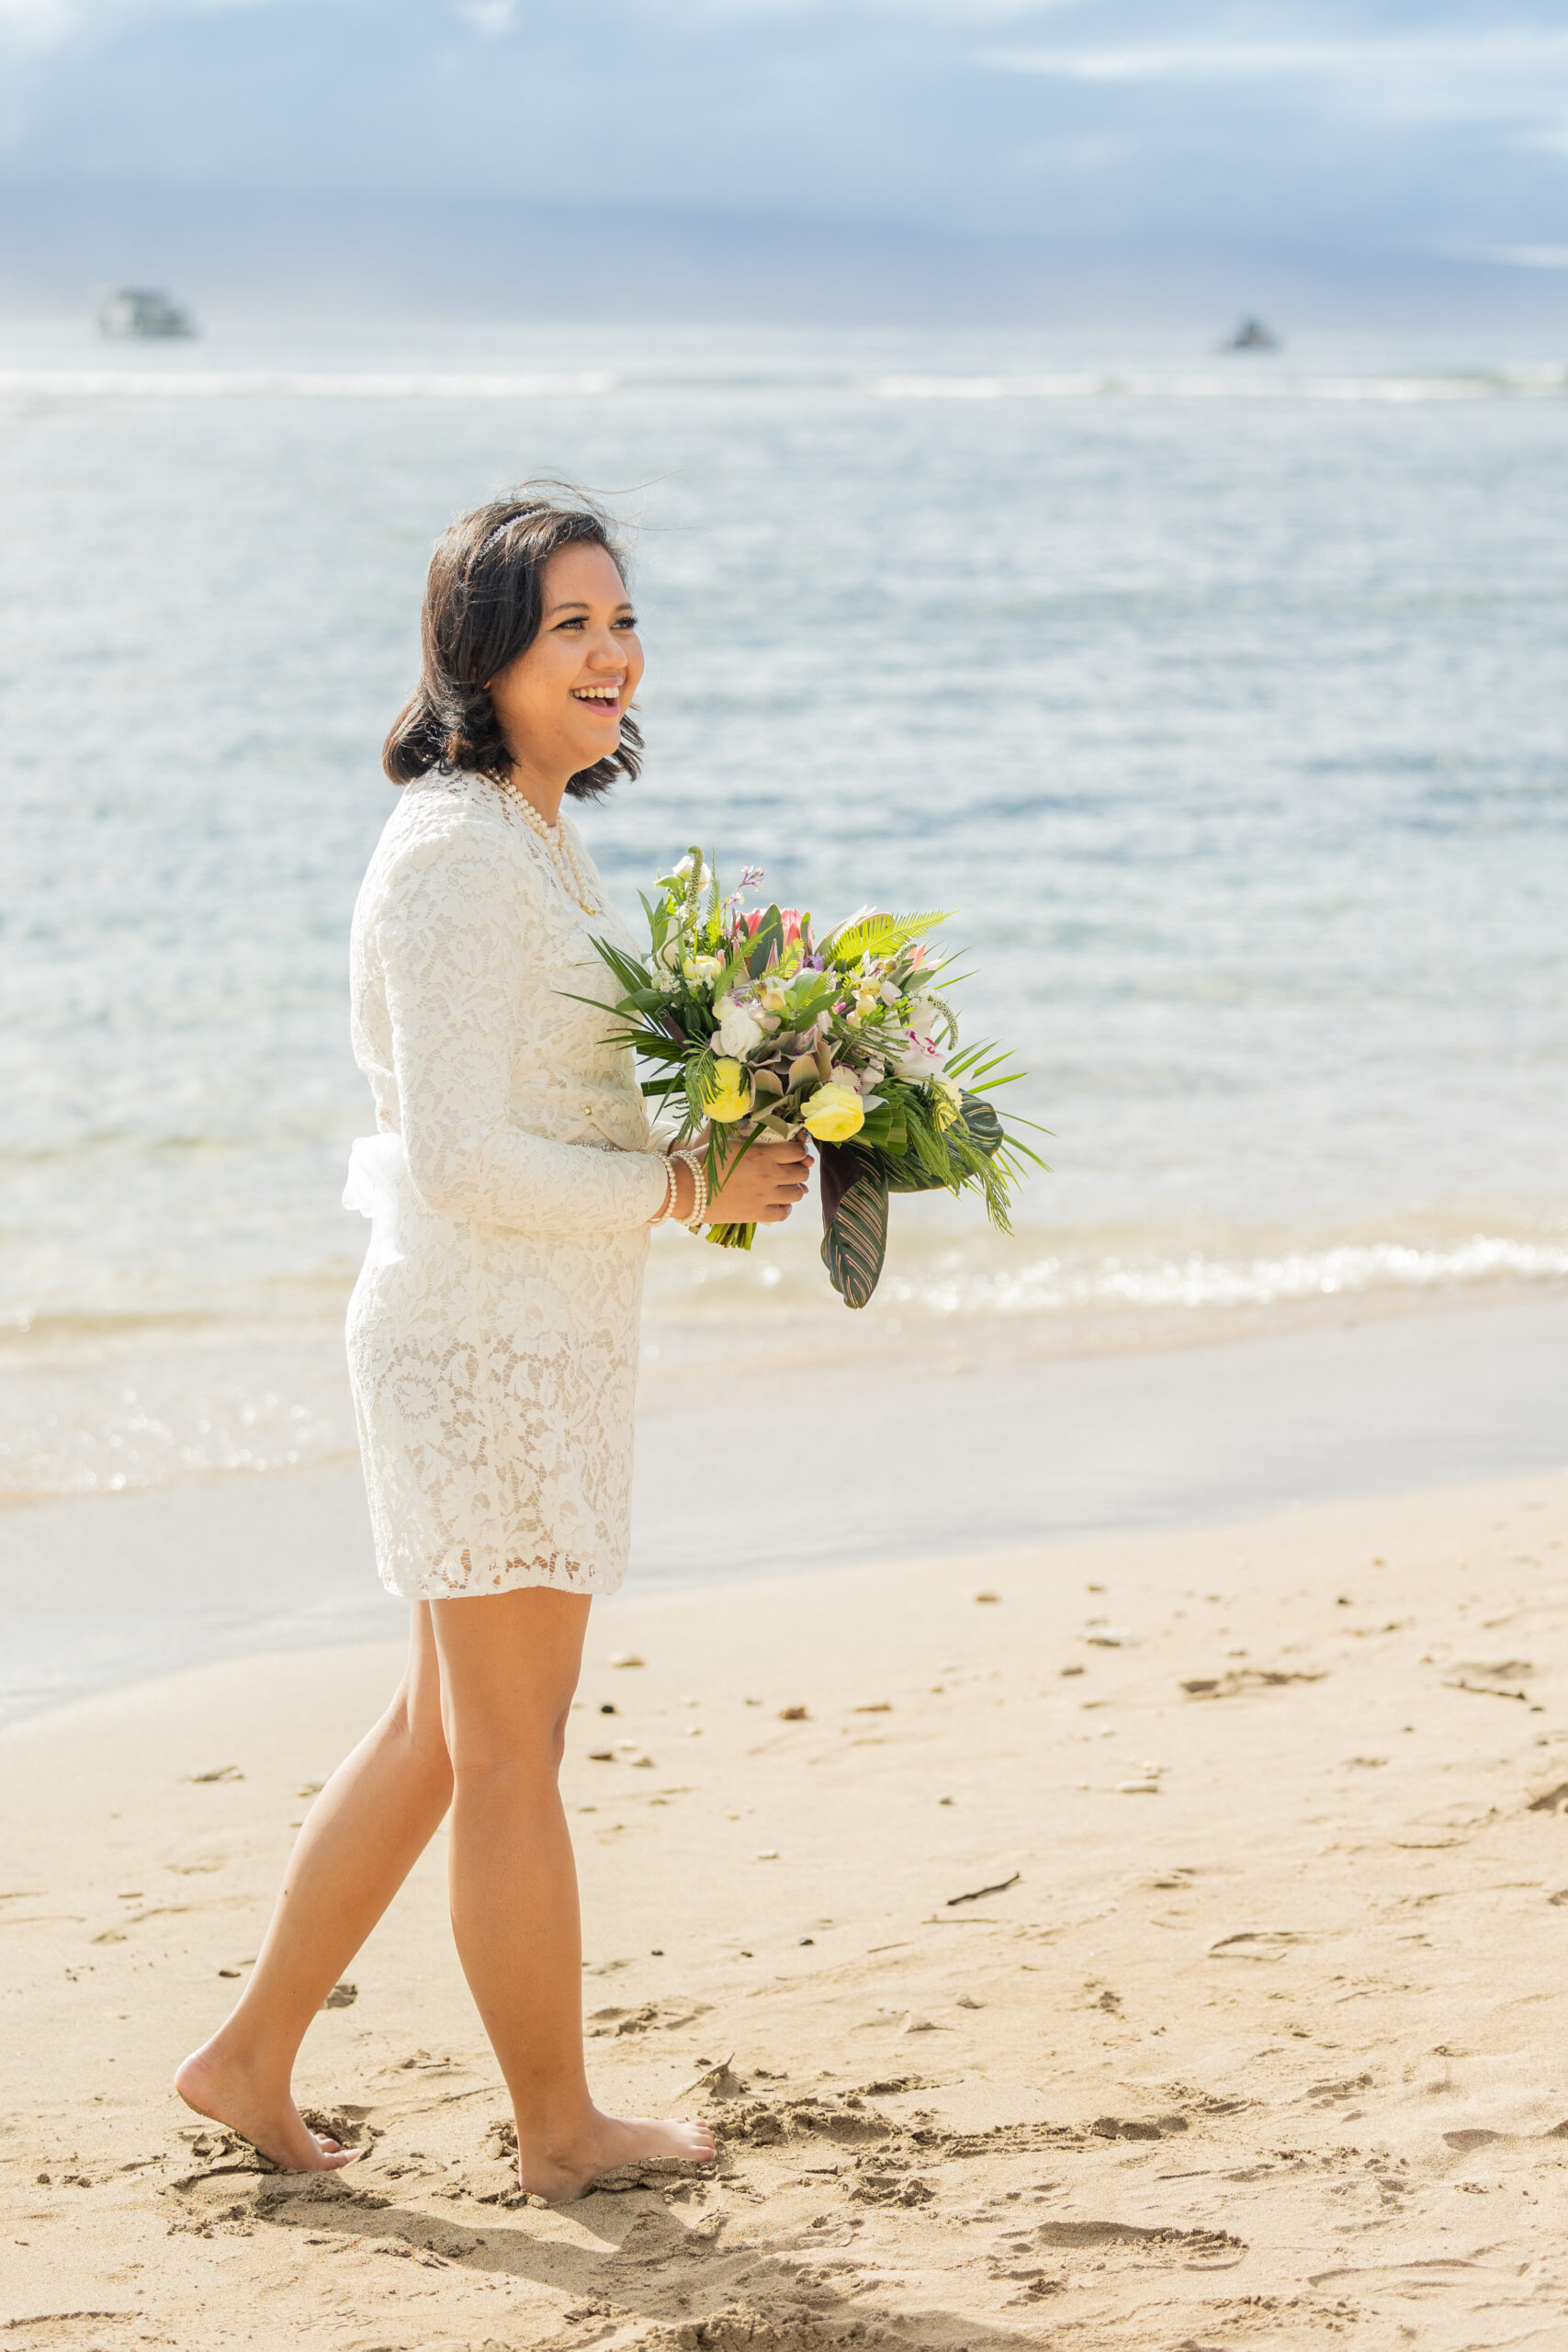 A bride sees her bride for the first time. They are getting married on the beach in front of the ocean.